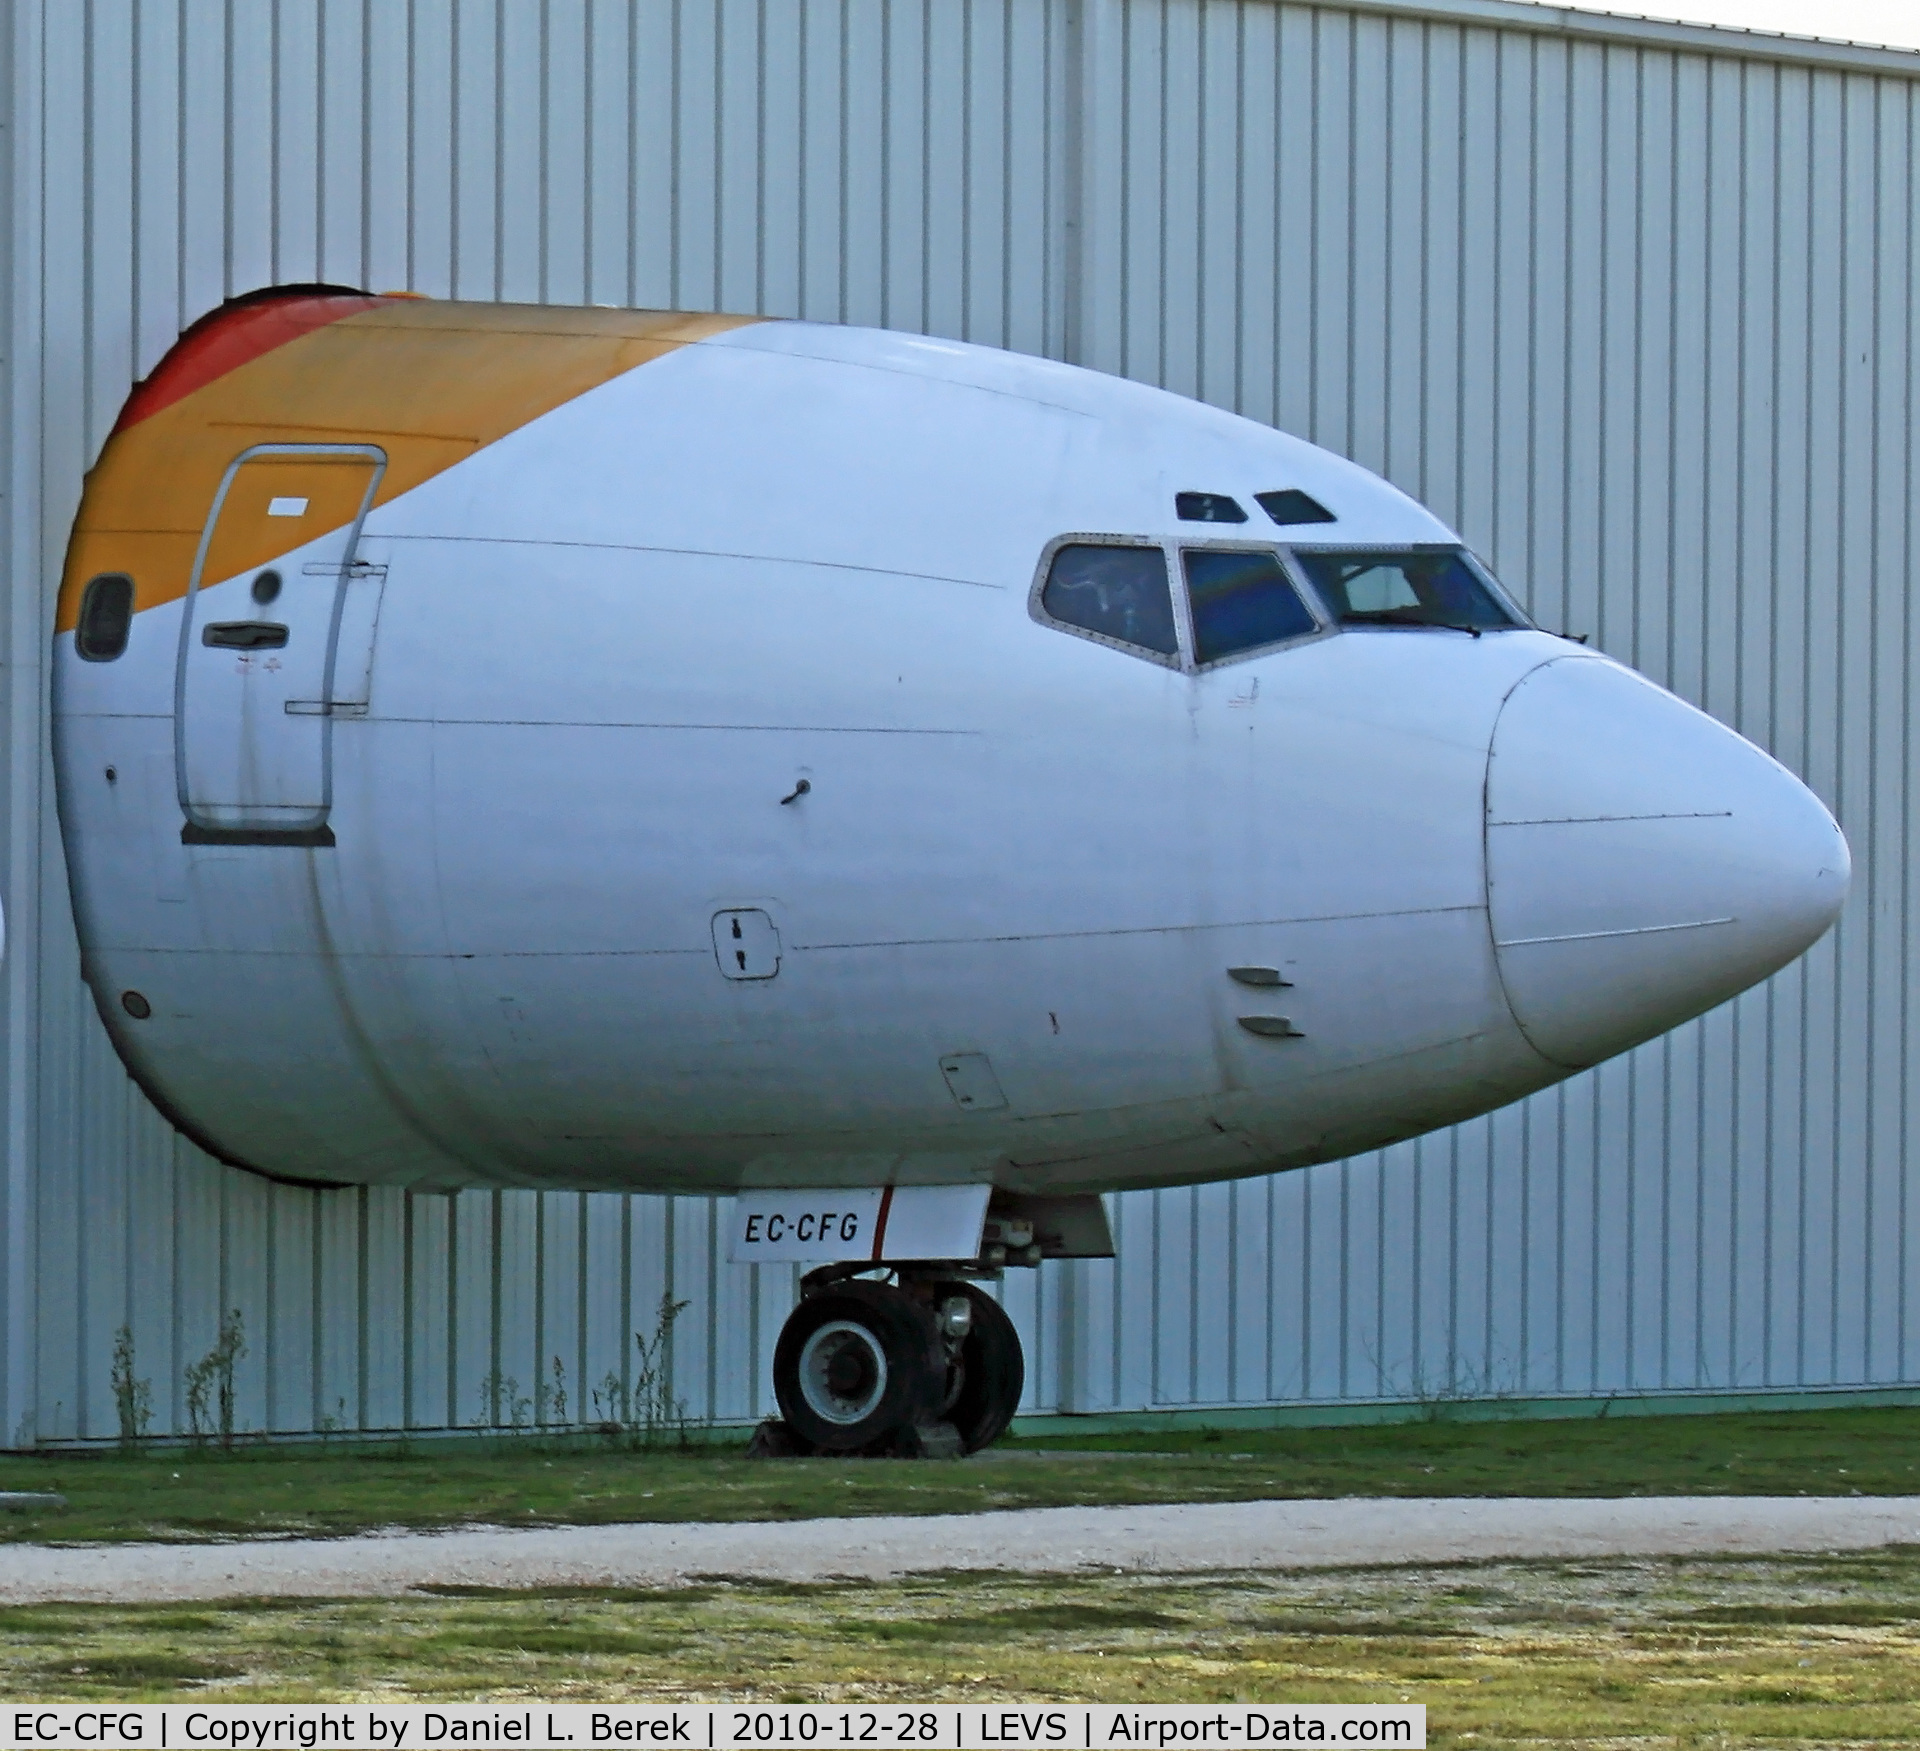 EC-CFG, 1974 Boeing 727-256 C/N 20817, Nose section preserved at Museo del Aire, Cuatro Vientos, Madrid, Spain